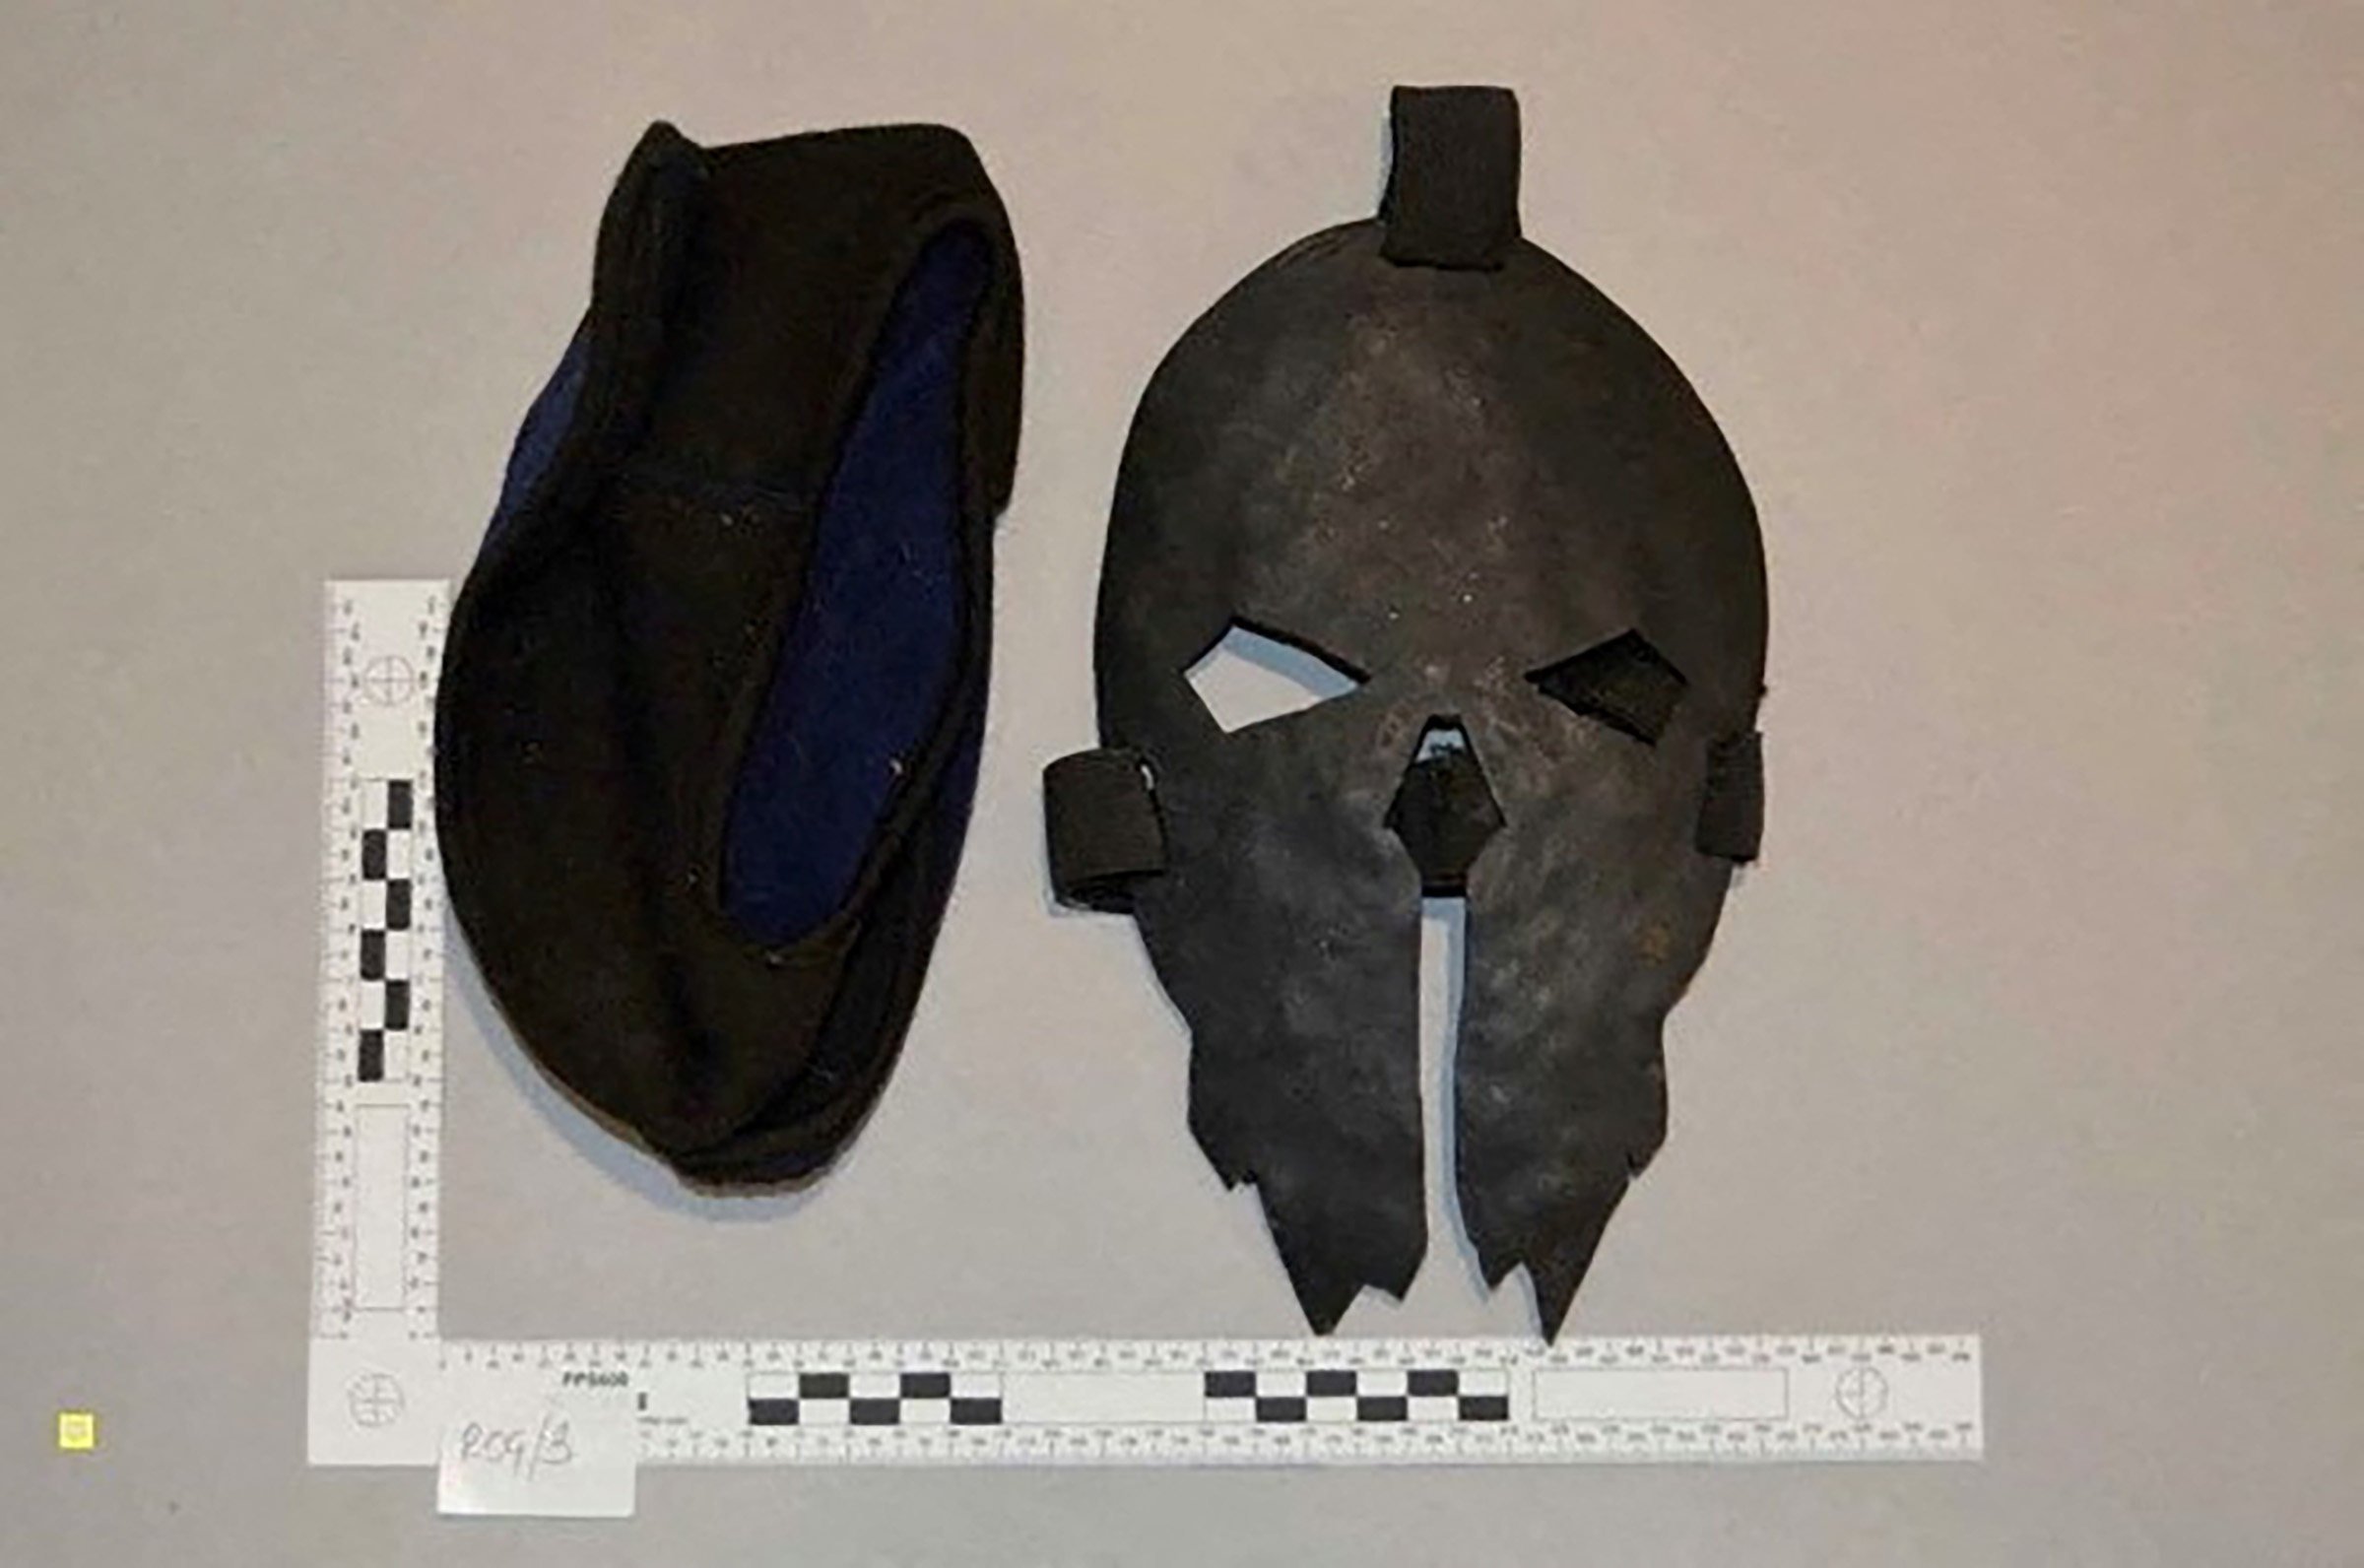 An image of the mask recovered from Jaswant Singh Chail on his arrest is seen in an undated handout image. Photo: Crown Prosecution Service via Reuters